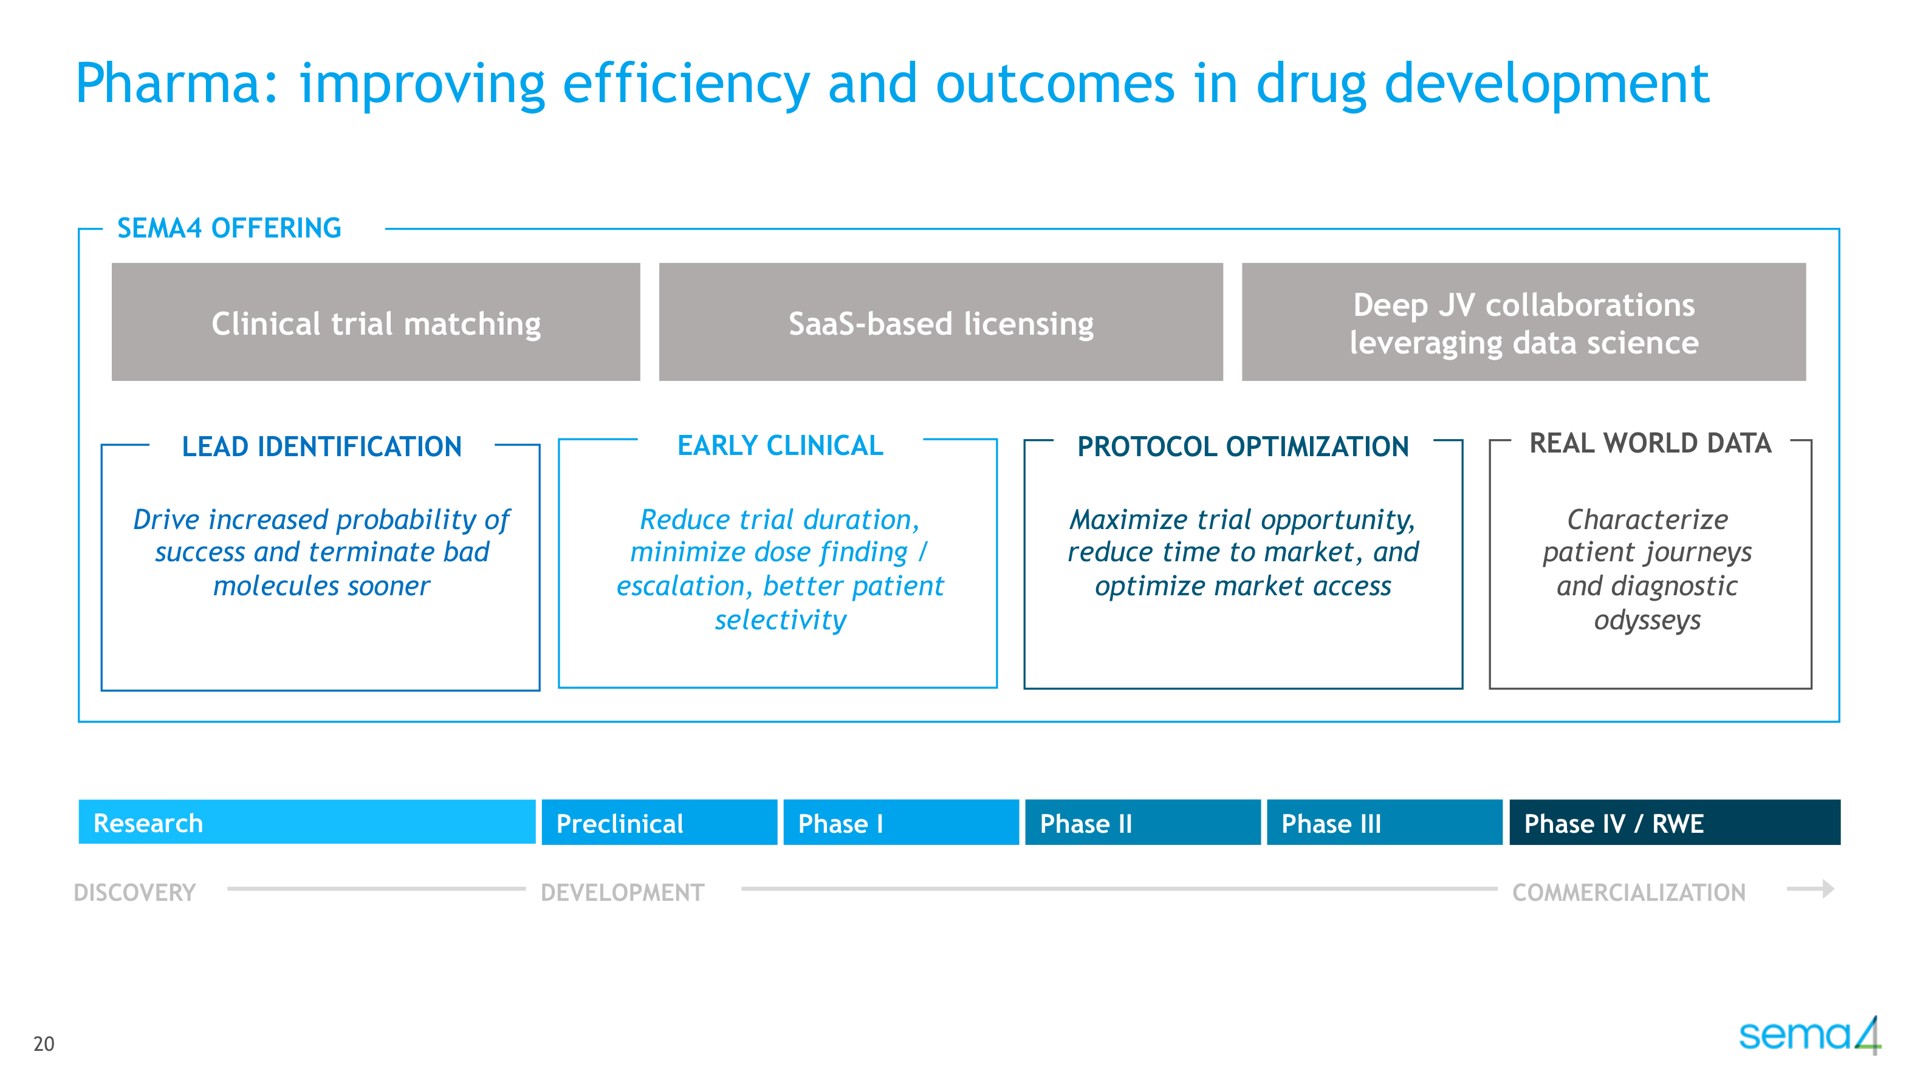 improving efficiency and outcomes in drug development | Sema4